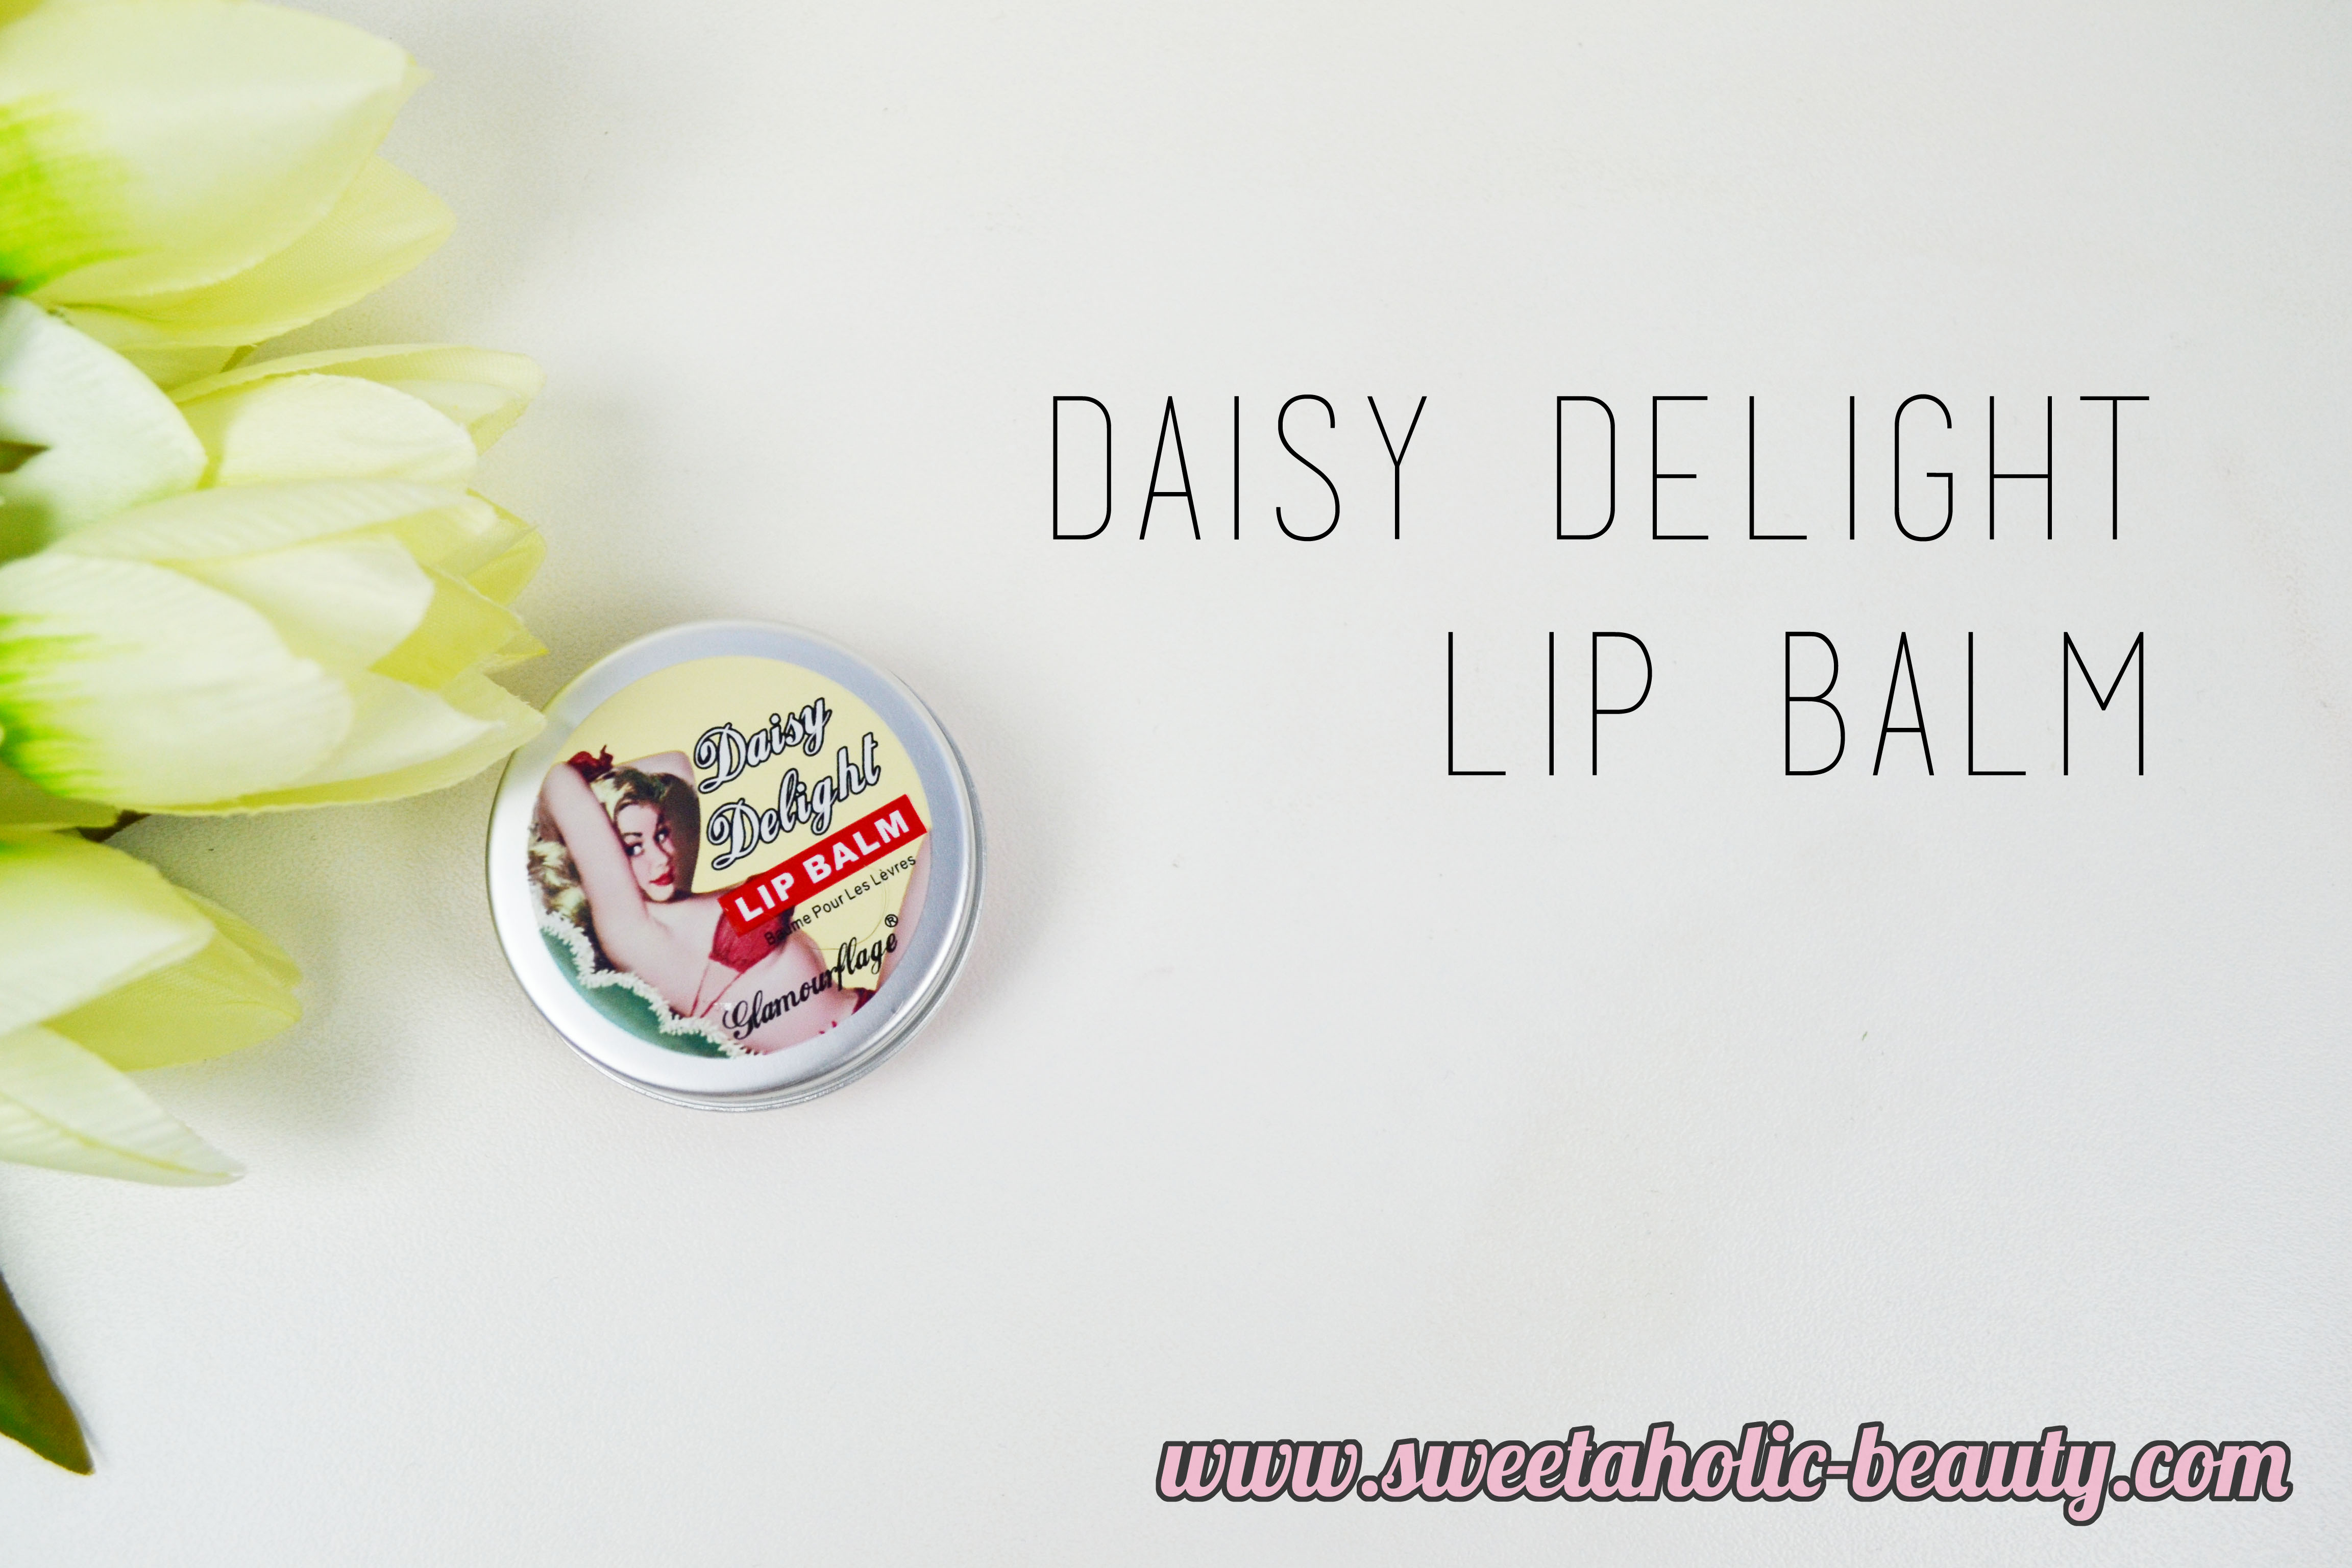 Glamourflage Skincare Daisy Delight Lip Balm Review - Sweetaholic Beauty